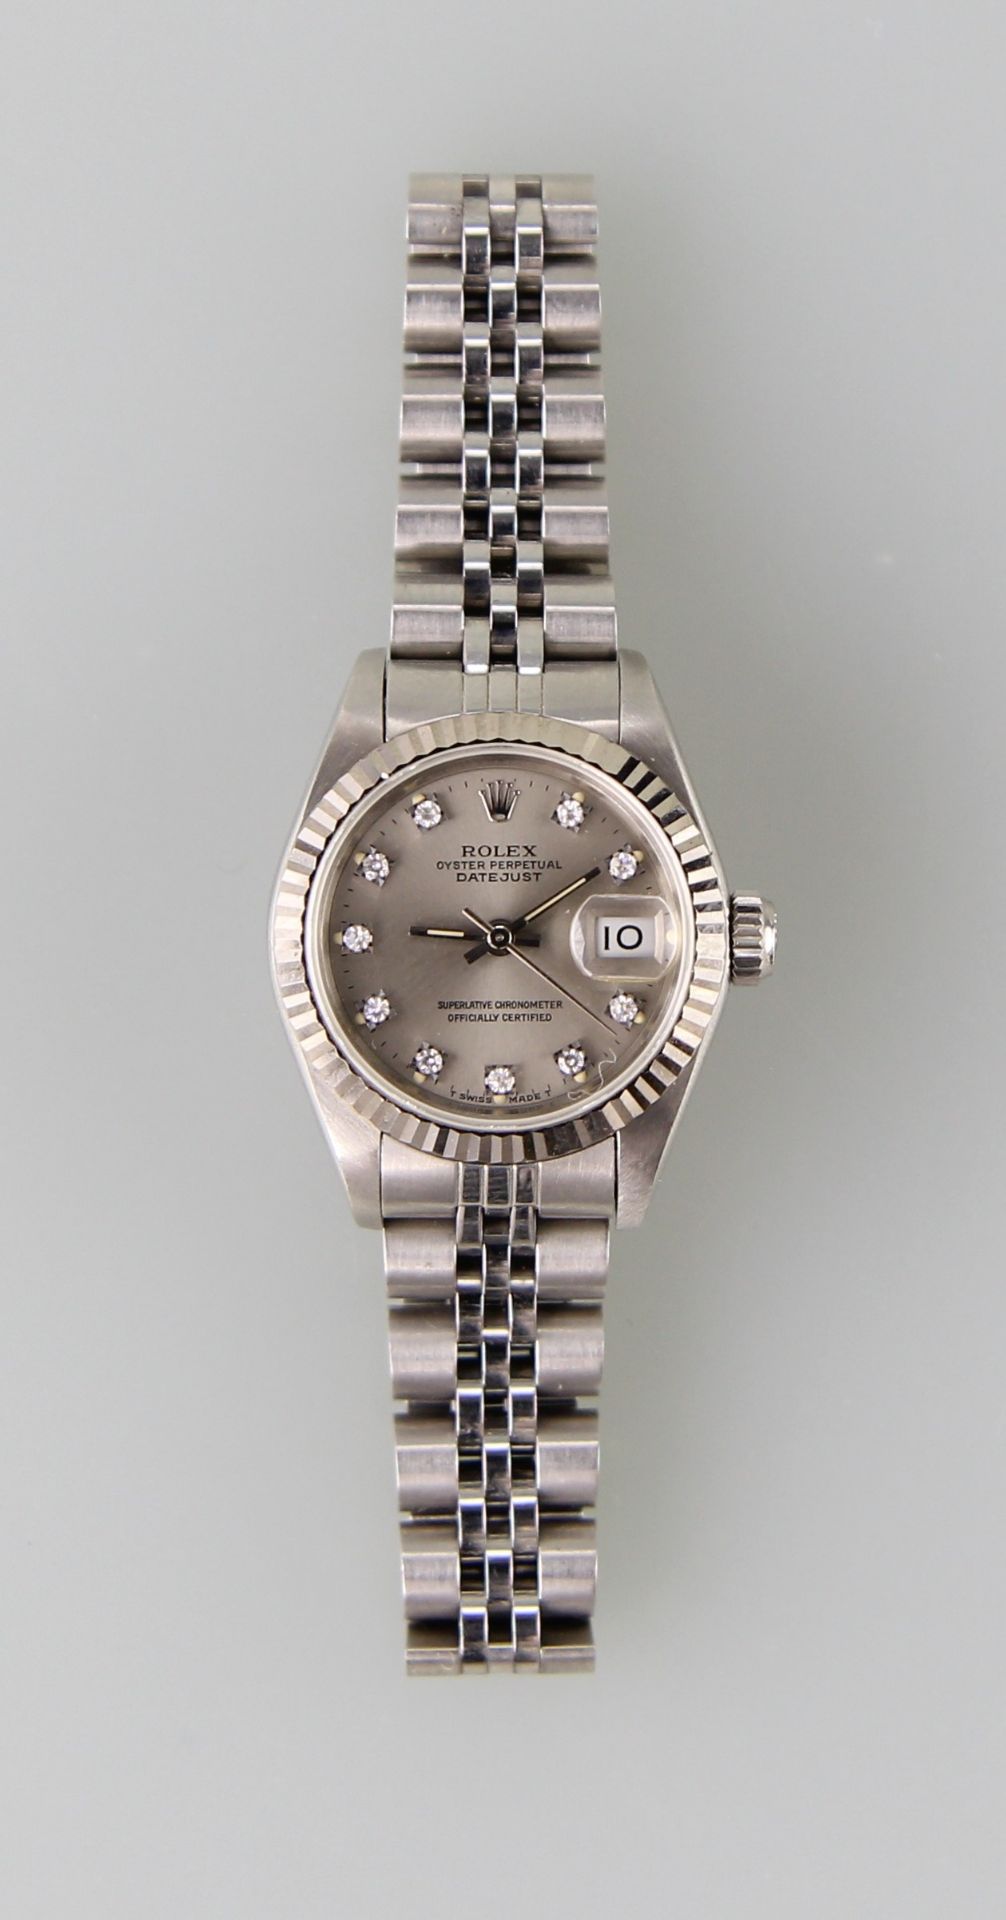 DAU "Rolex Oyster Perpetual Datejust" - Image 2 of 4